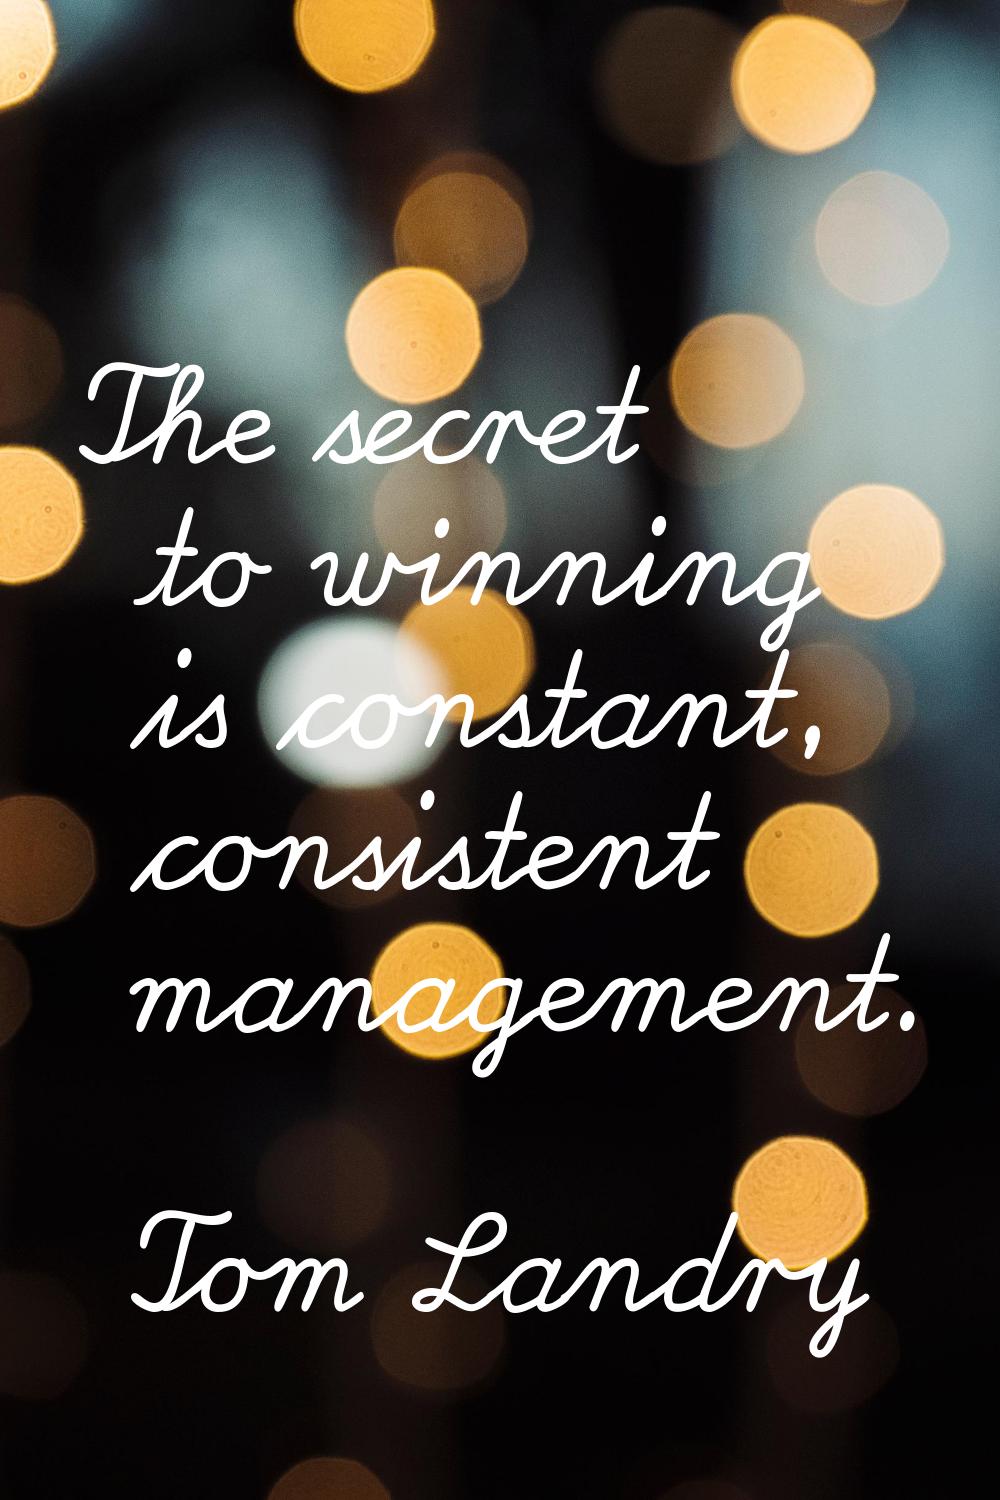 The secret to winning is constant, consistent management.